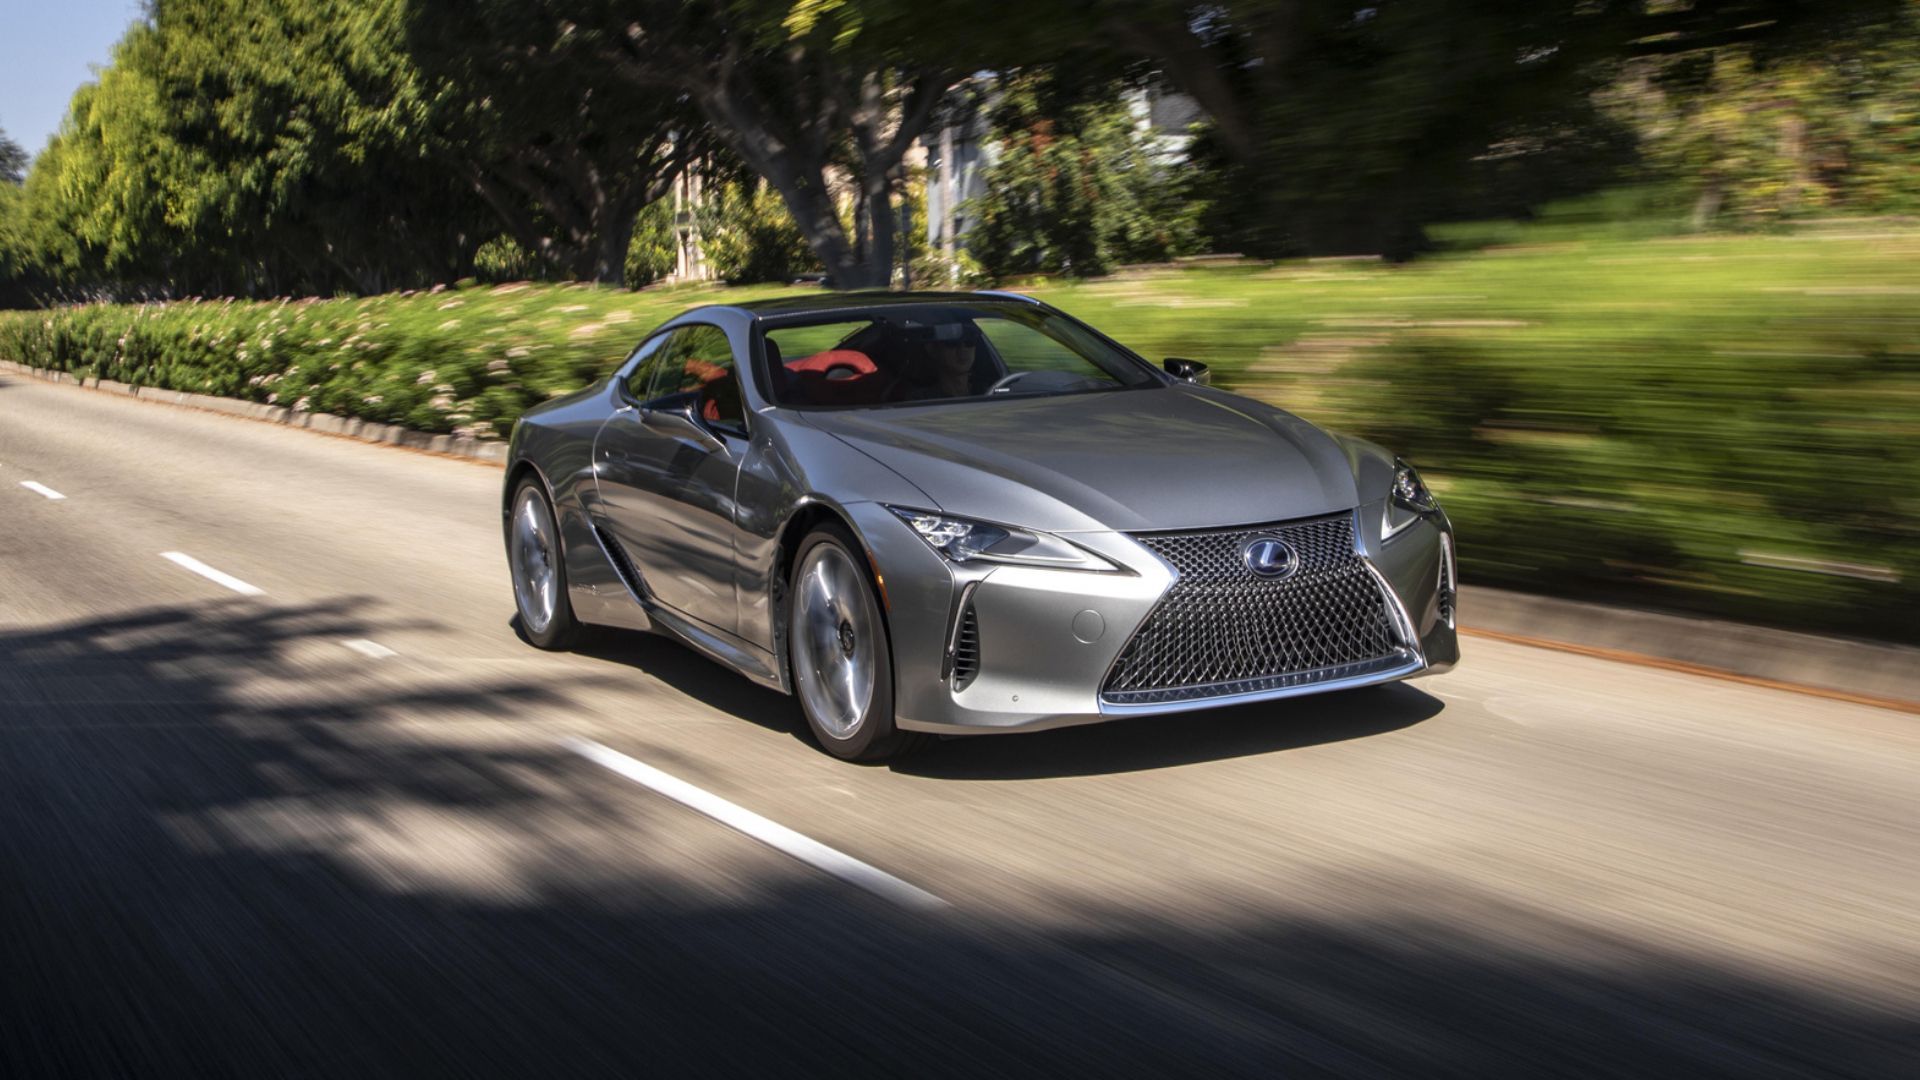 2023 Lexus LC500H in silver driving on town road